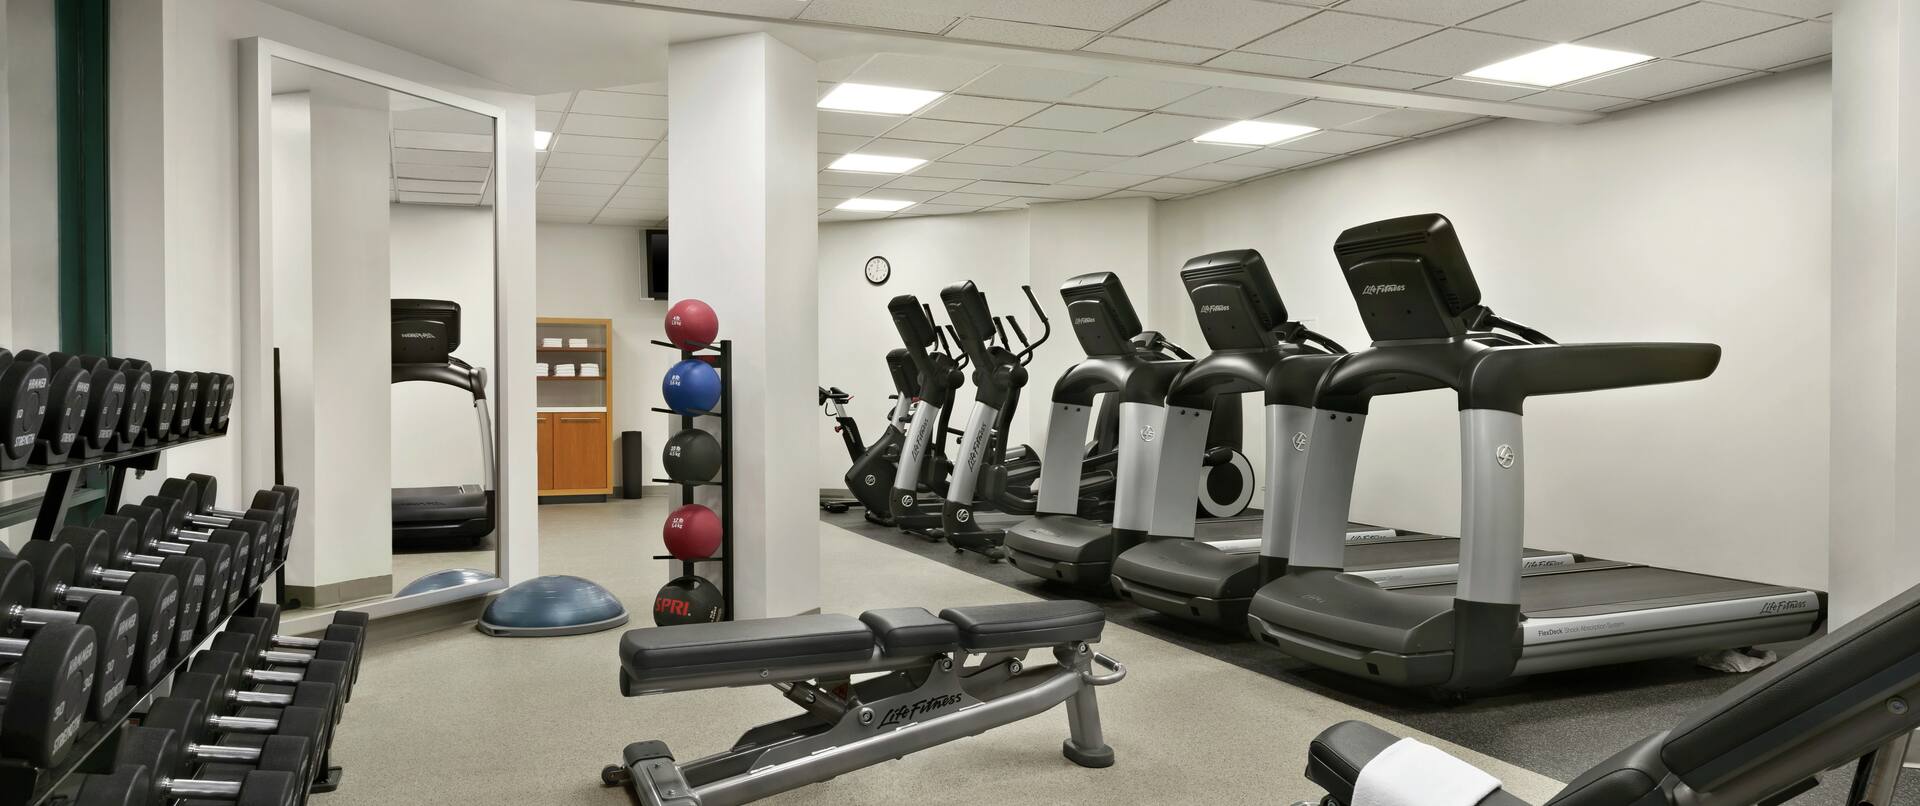 Fitness Center with Treadmills, Dumbbells, and Mirrors